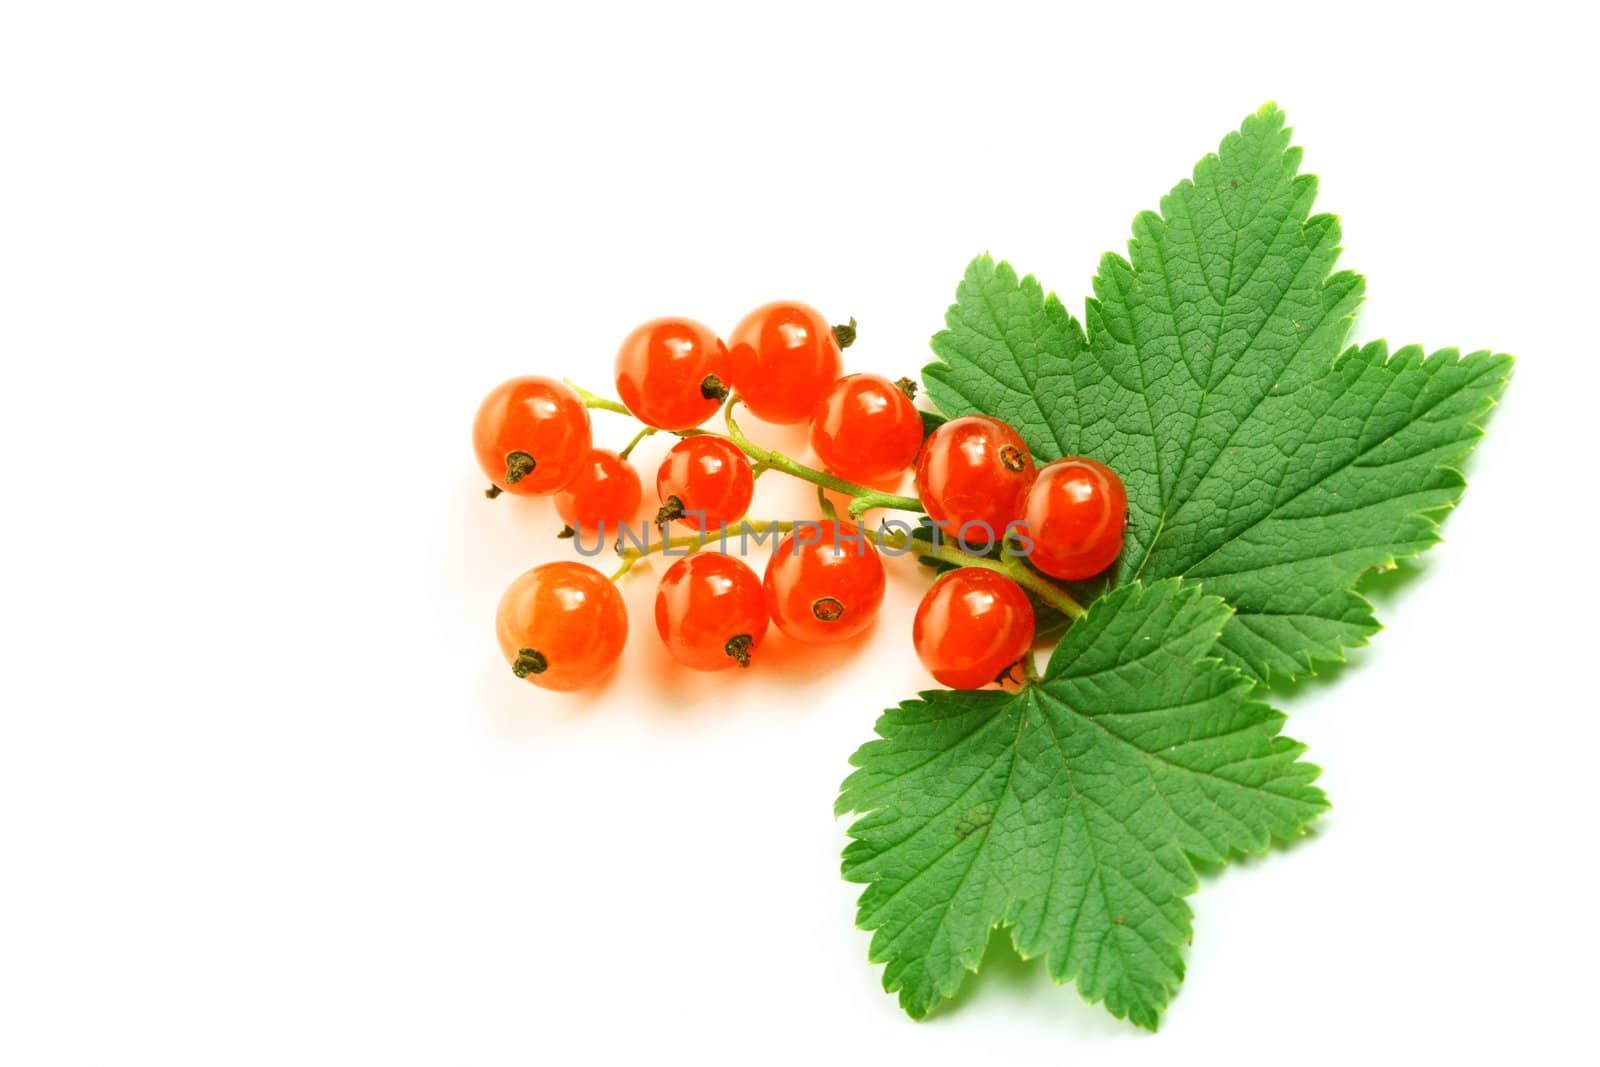 red currant and green leaf isolated on white background